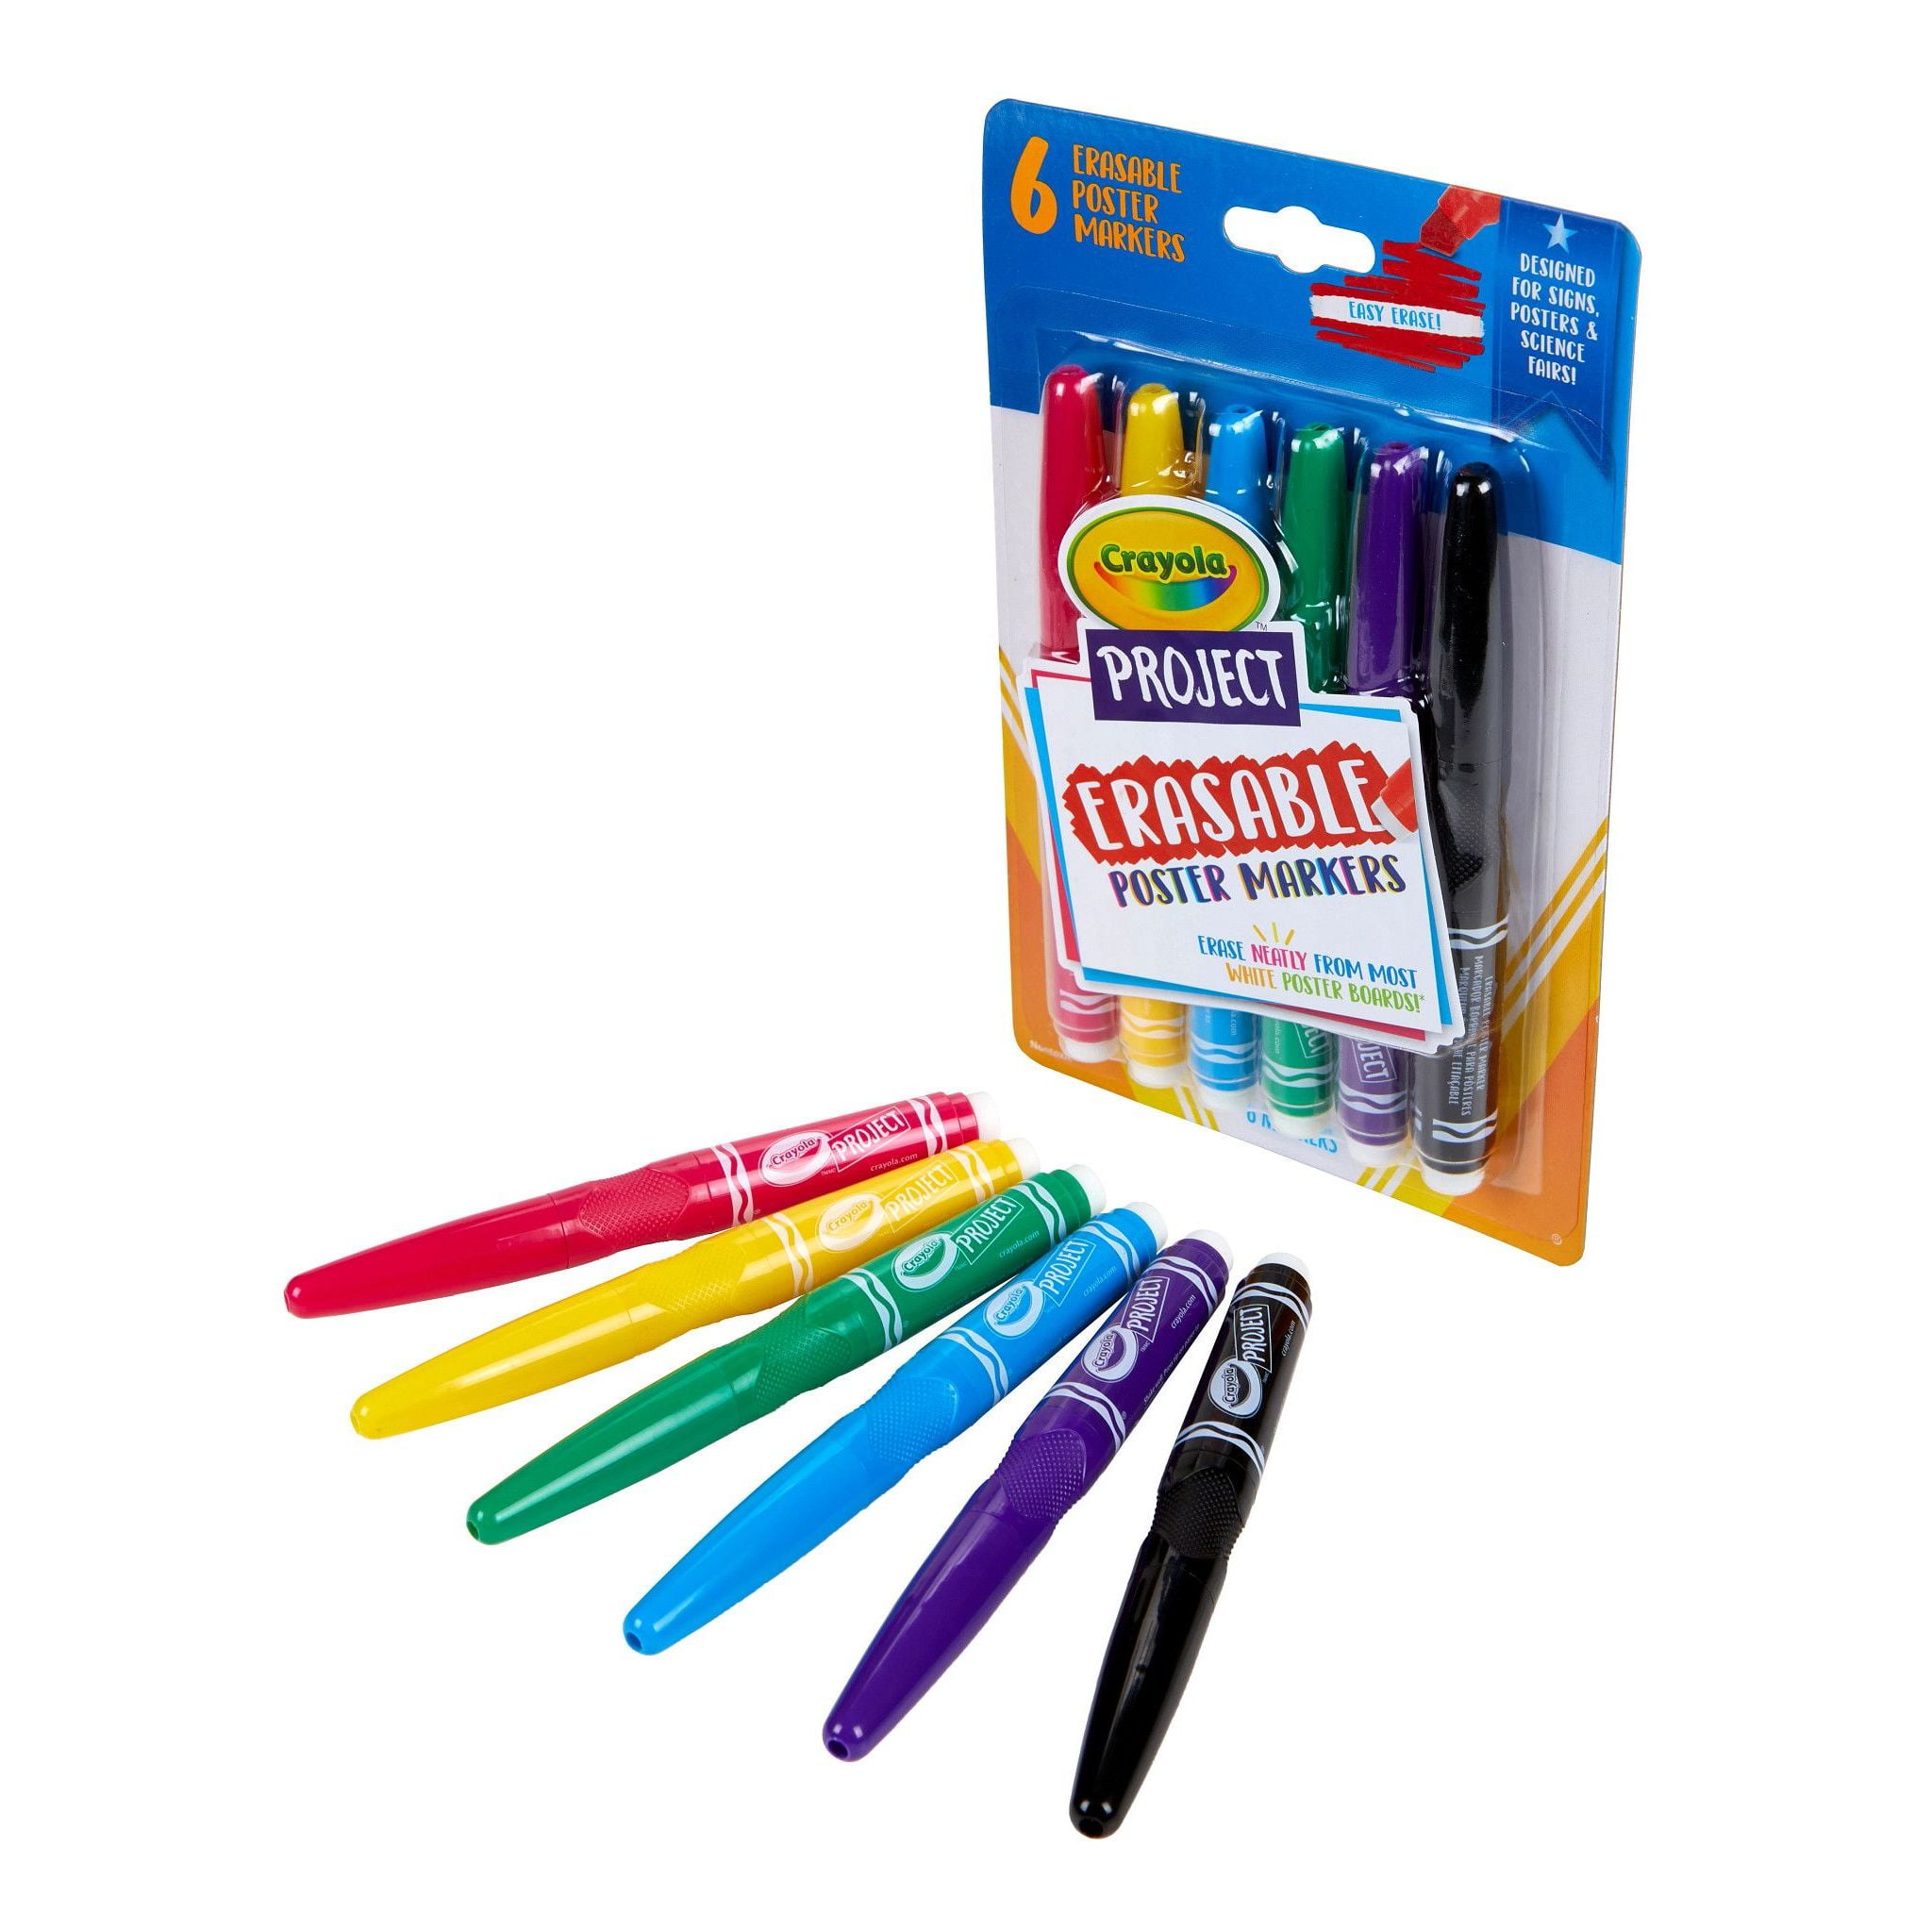 Crayola Erasable Poster Markers, Poster Board Markers, Cool School Supplies, 6 Count